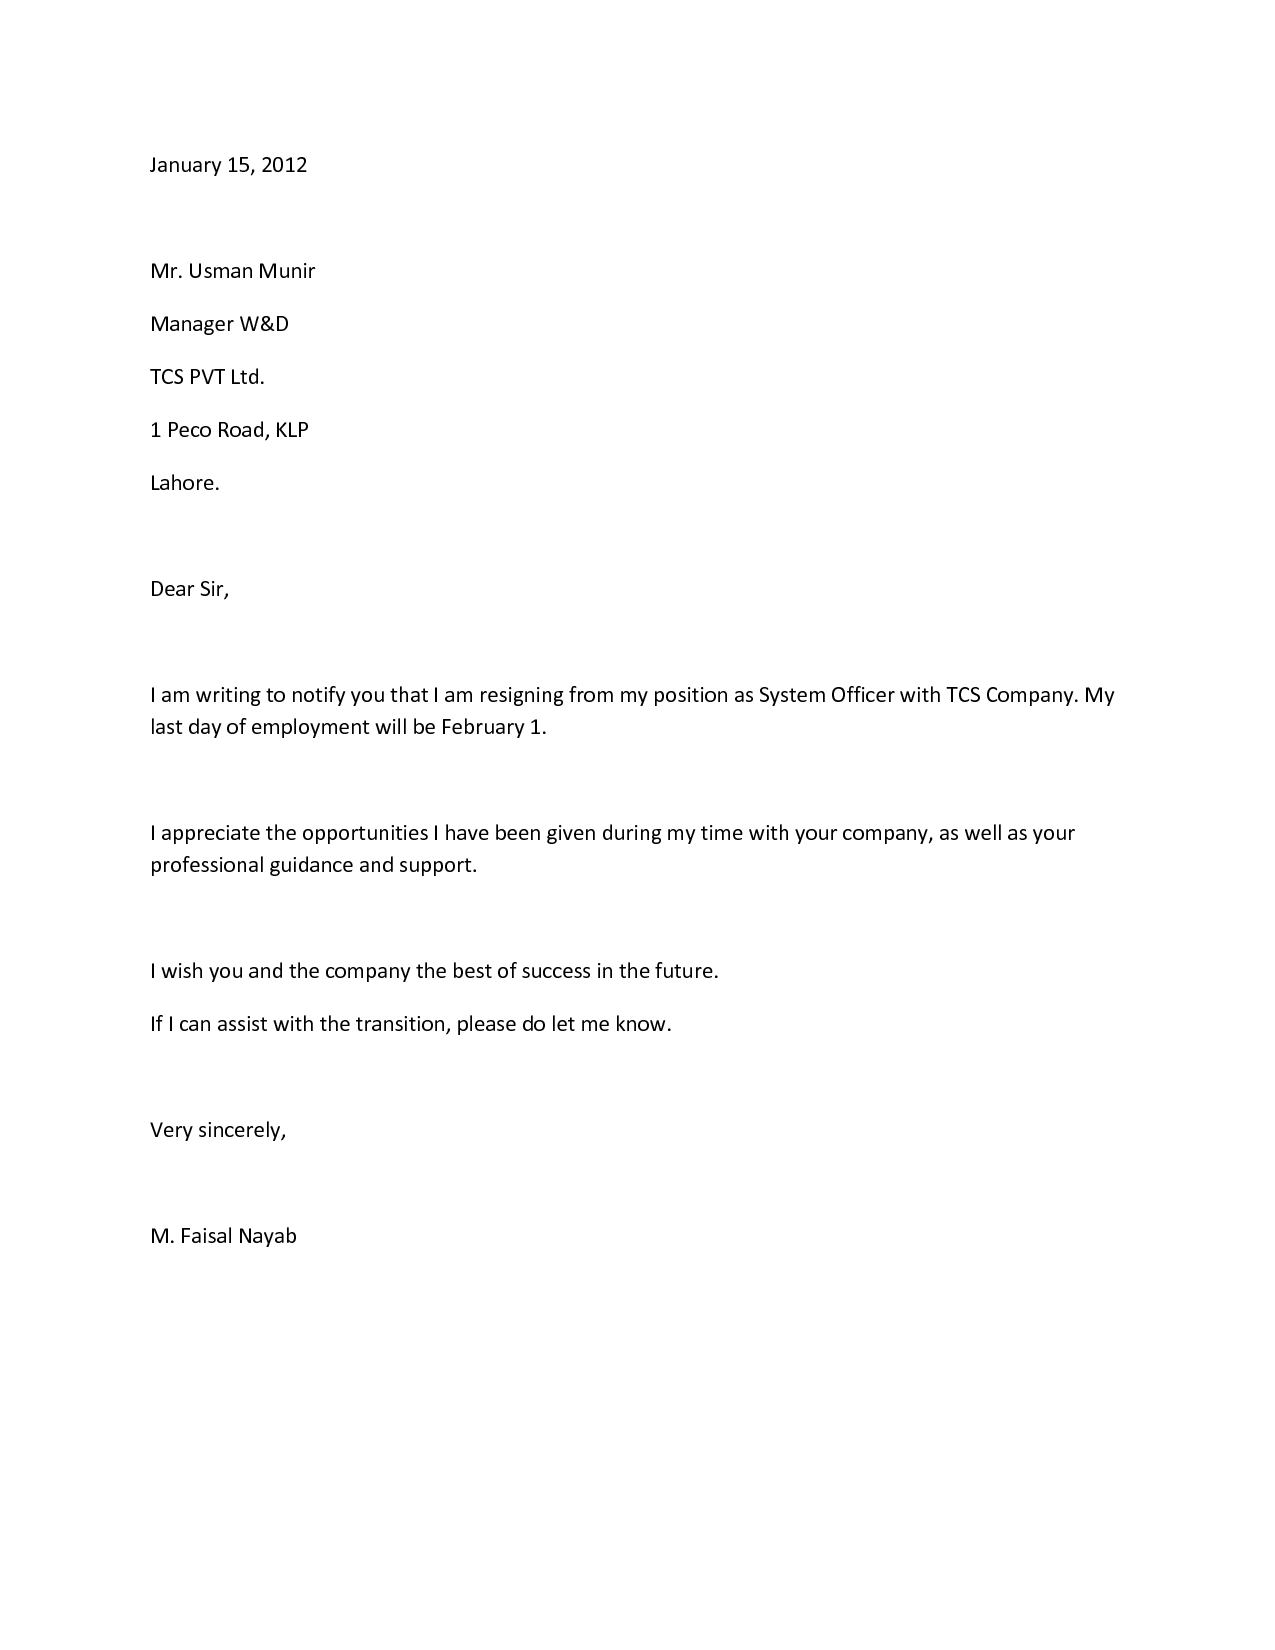 how to write a proper resignation letter images letter of